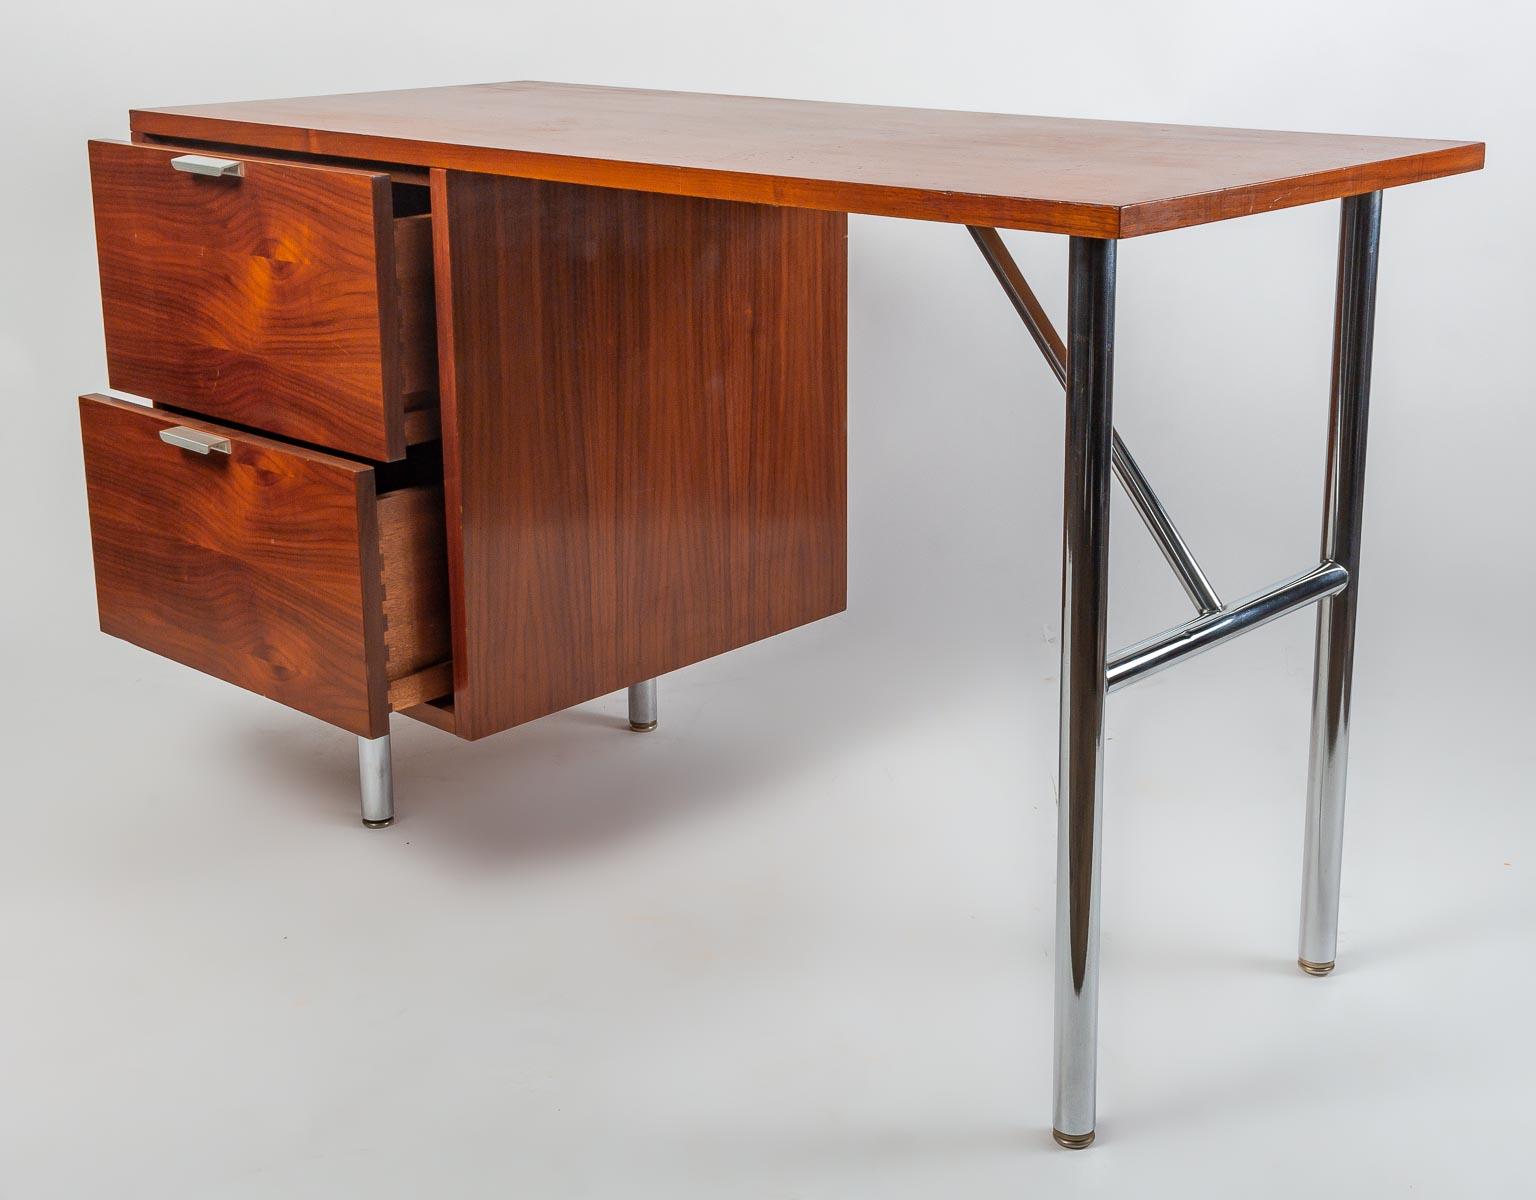 American 1950 Rare and Authentic Desk Designed by George Nelson for Herman Miller